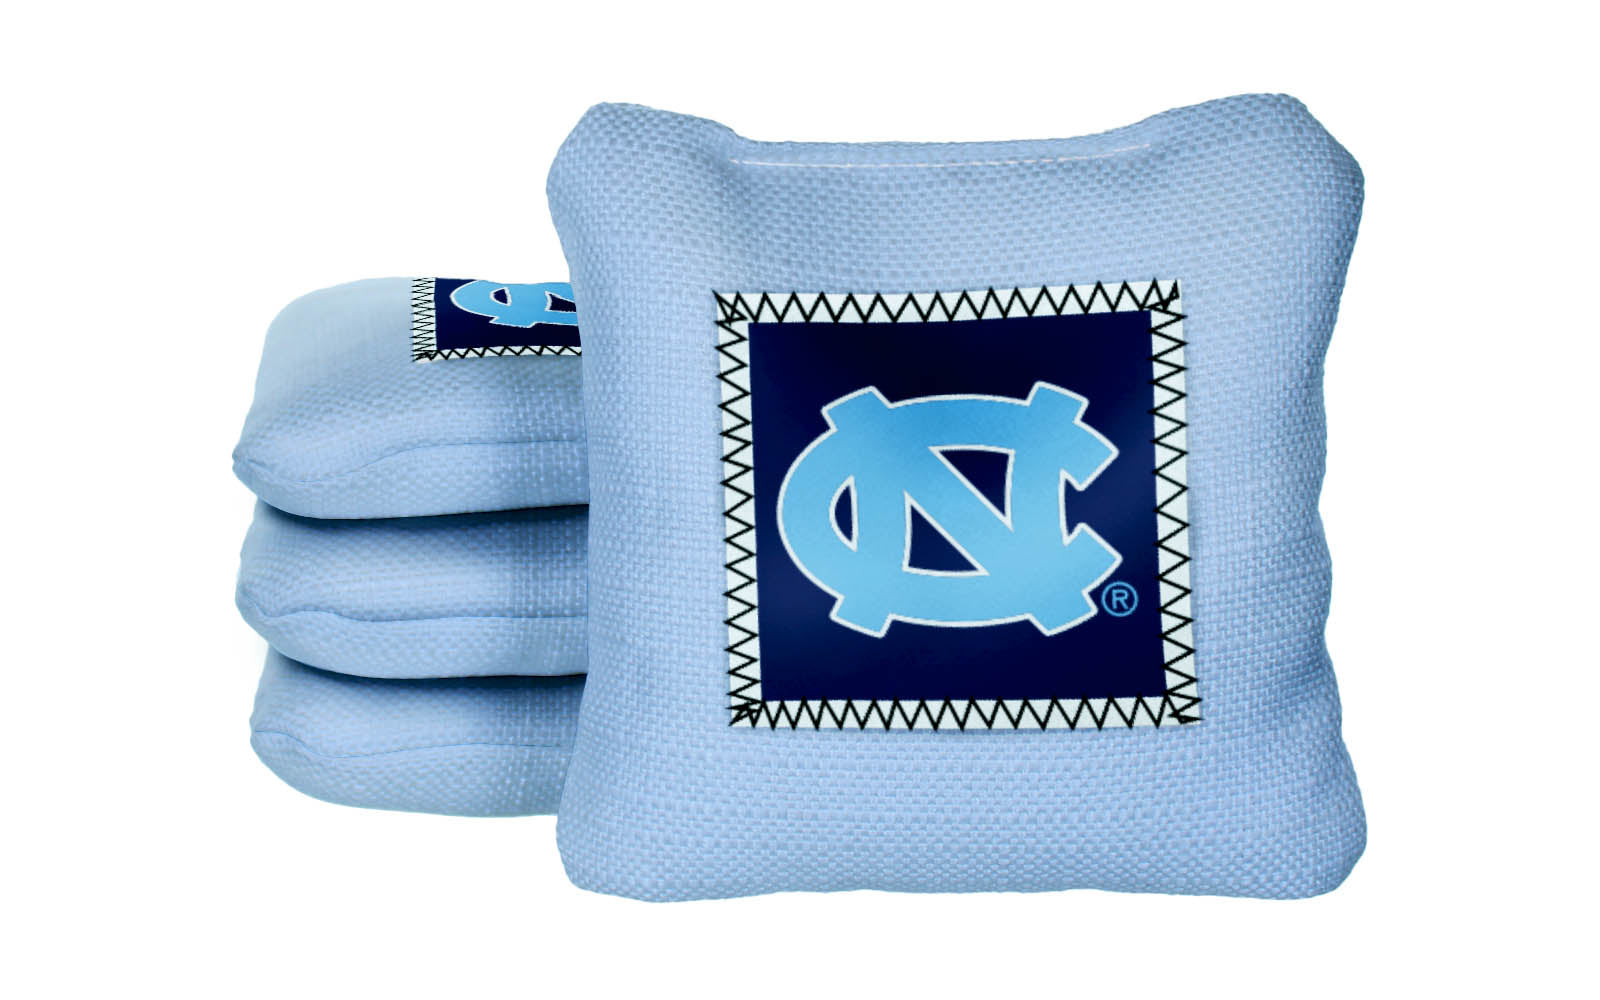 Officially Licensed Collegiate Cornhole Bags - AllCornhole Game Changers Steady 2.0 - Set of 4 - University of North Carolina